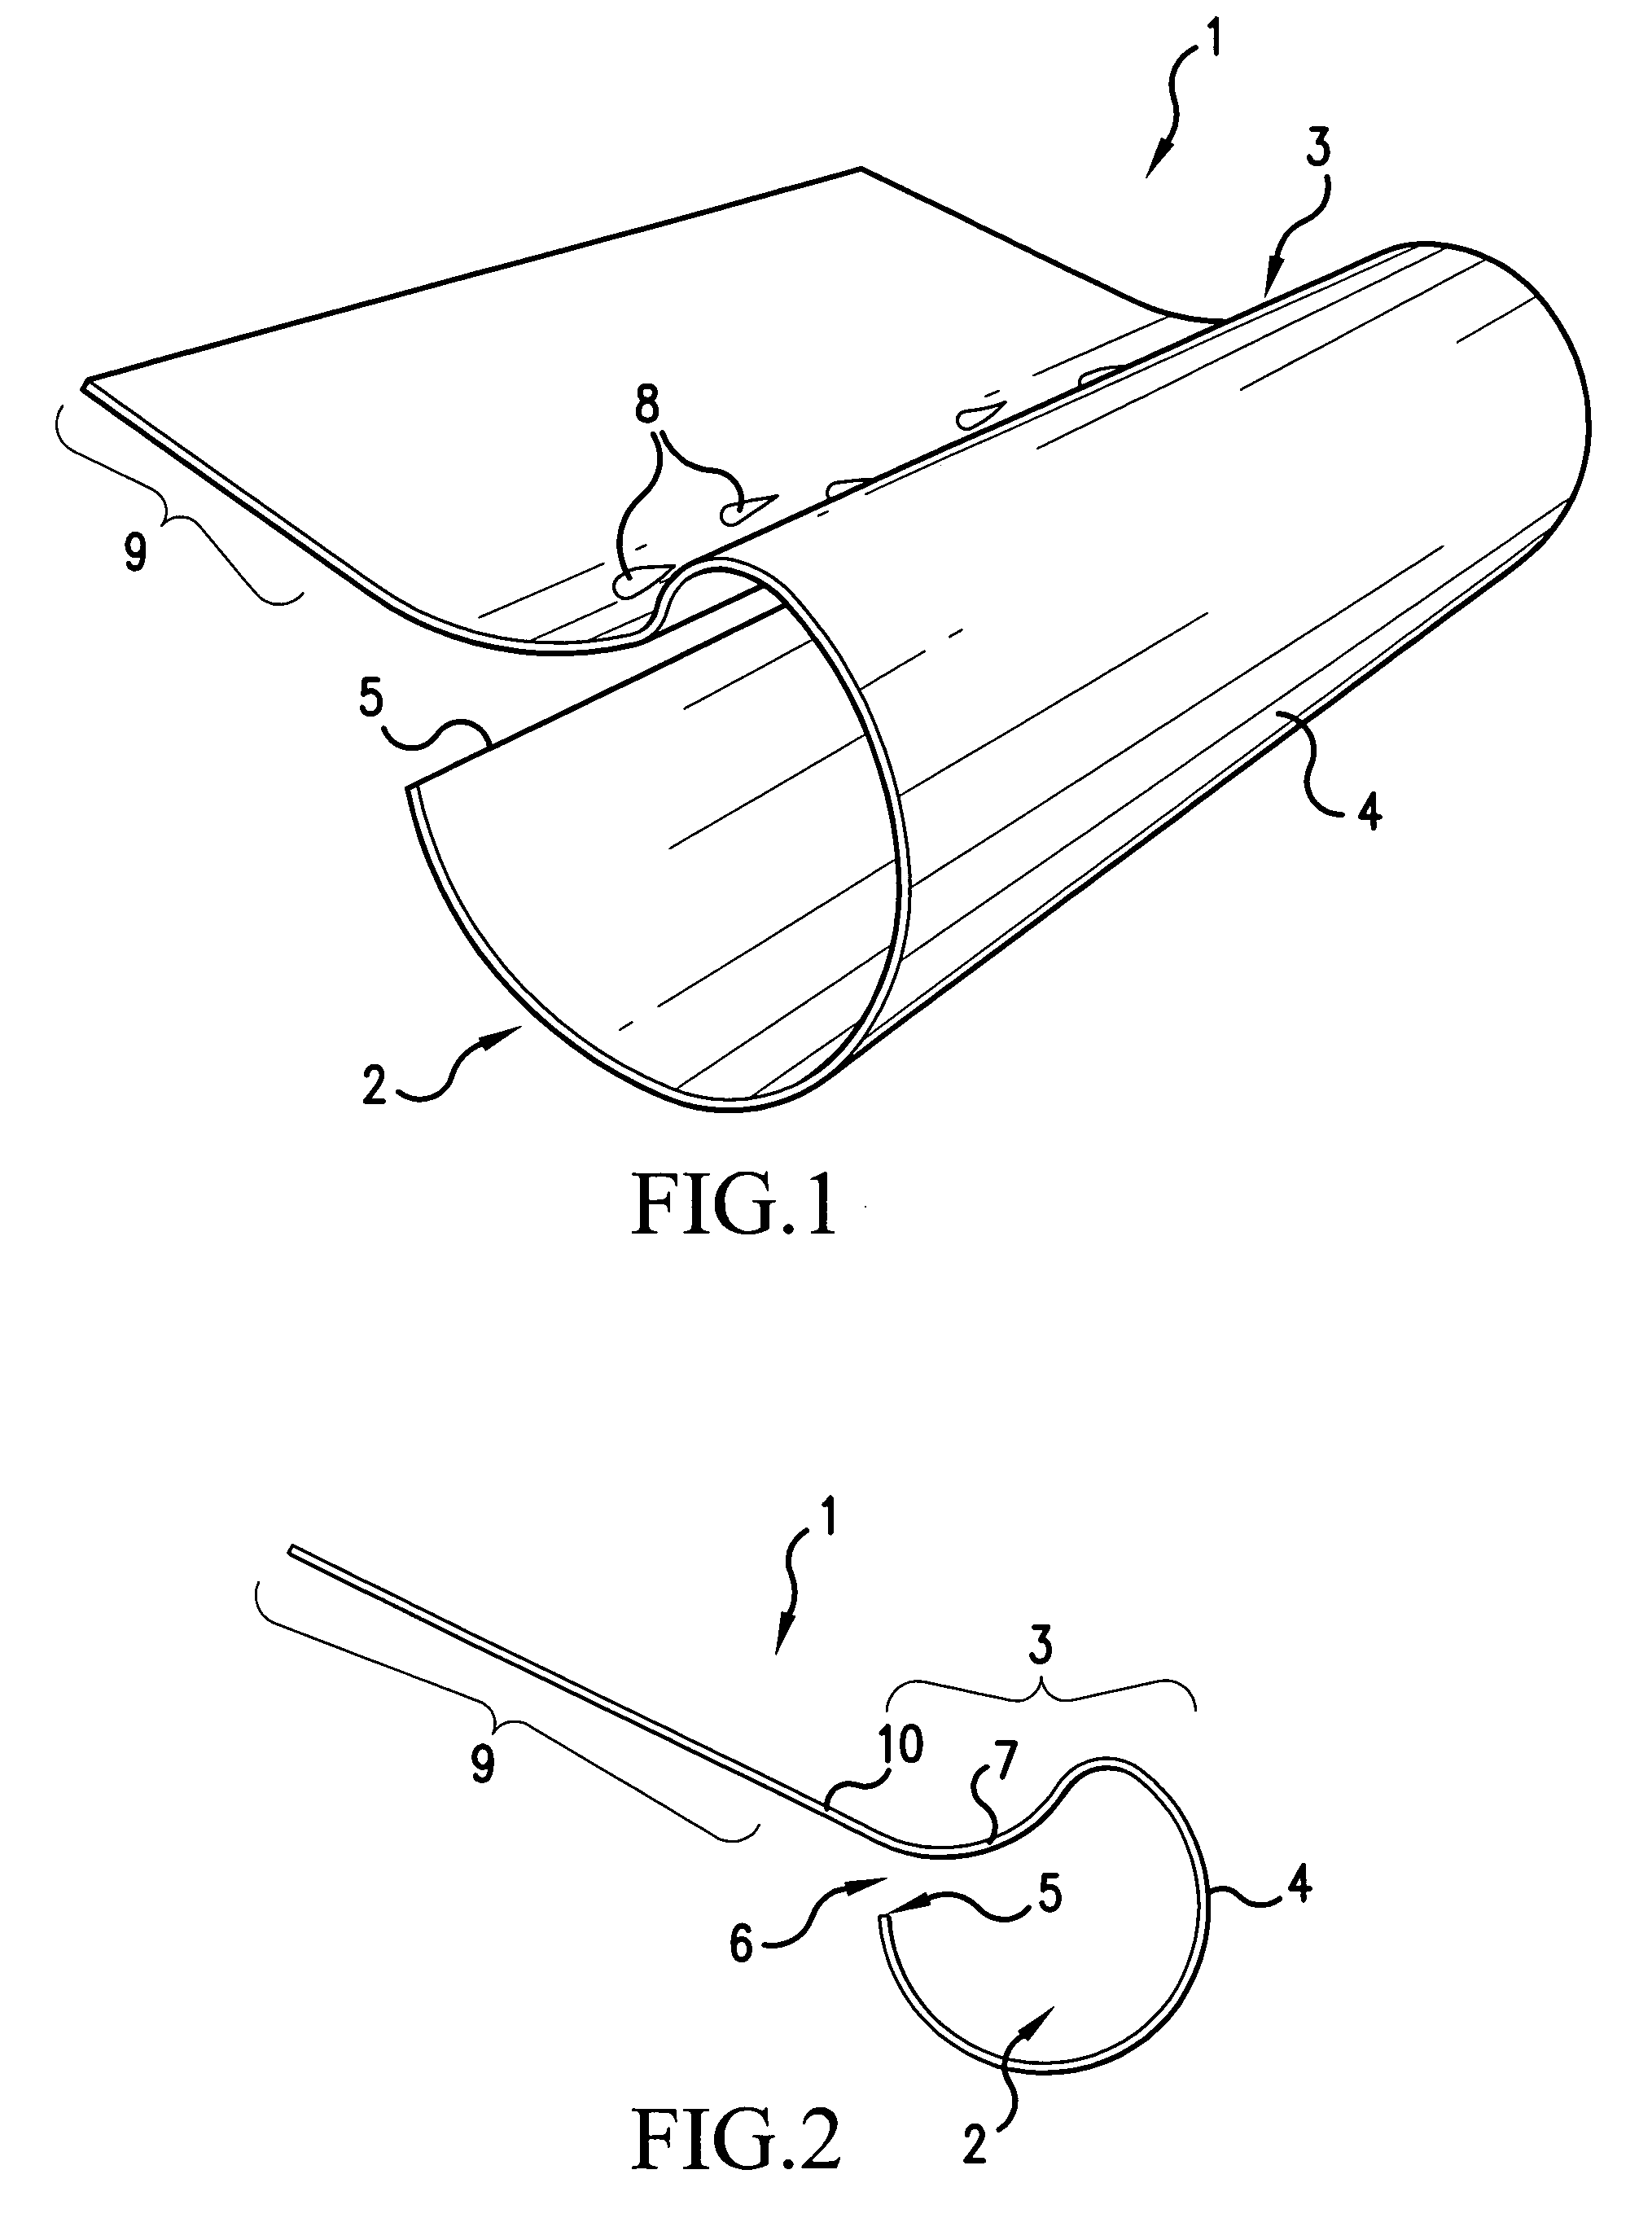 Gutter member and shielding device incorporating same